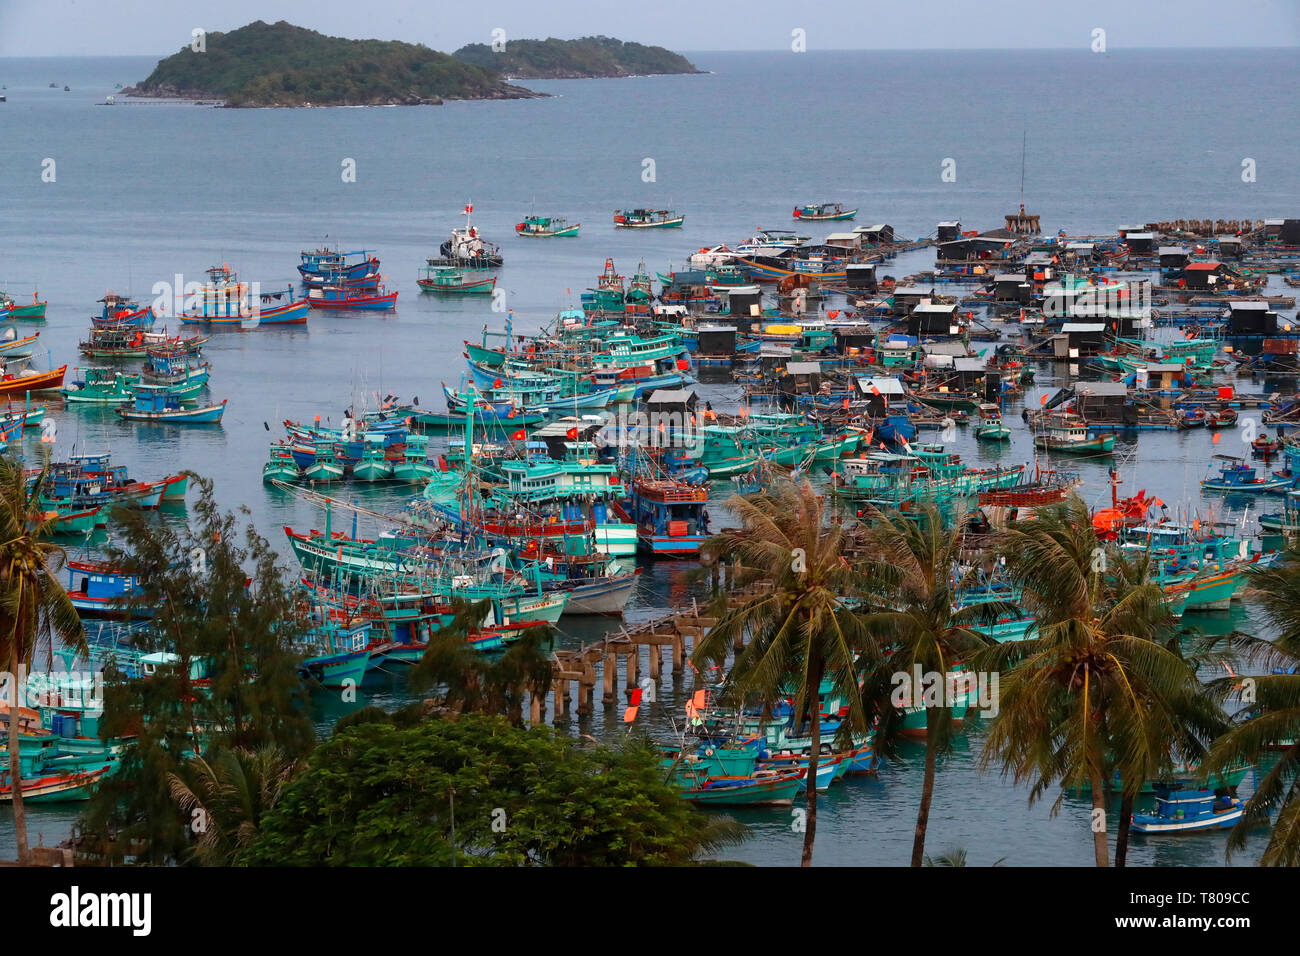 Fishing boats, An Thoi harbour, Vietnam, Indochina, Southeast Asia, Asia Stock Photo